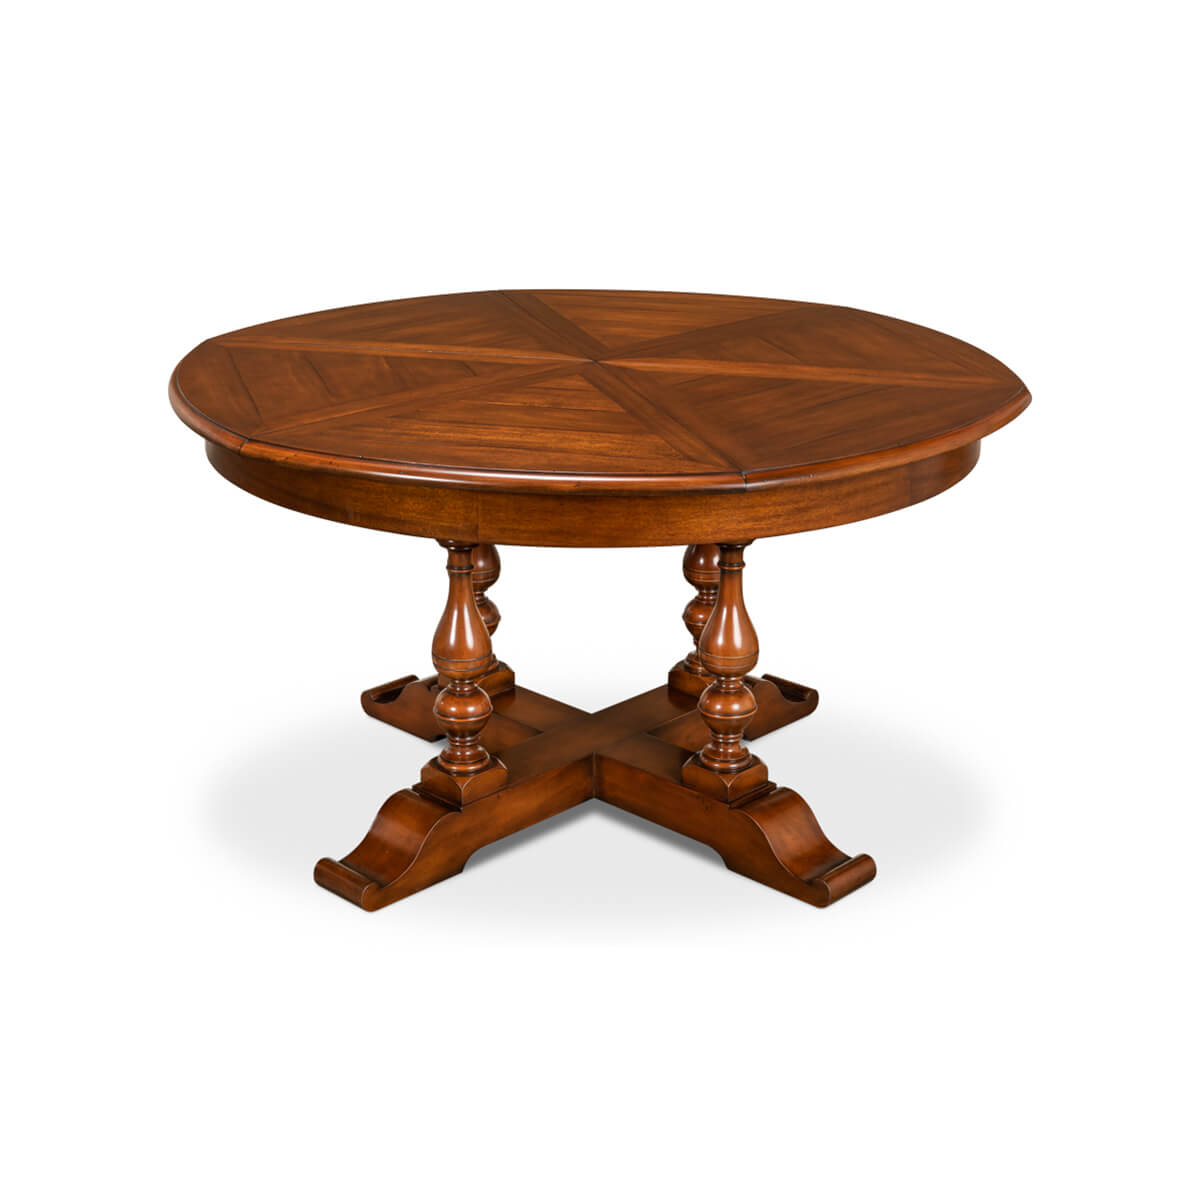 Early English Style Round Extension Dining Table, 70" - English Georgian America